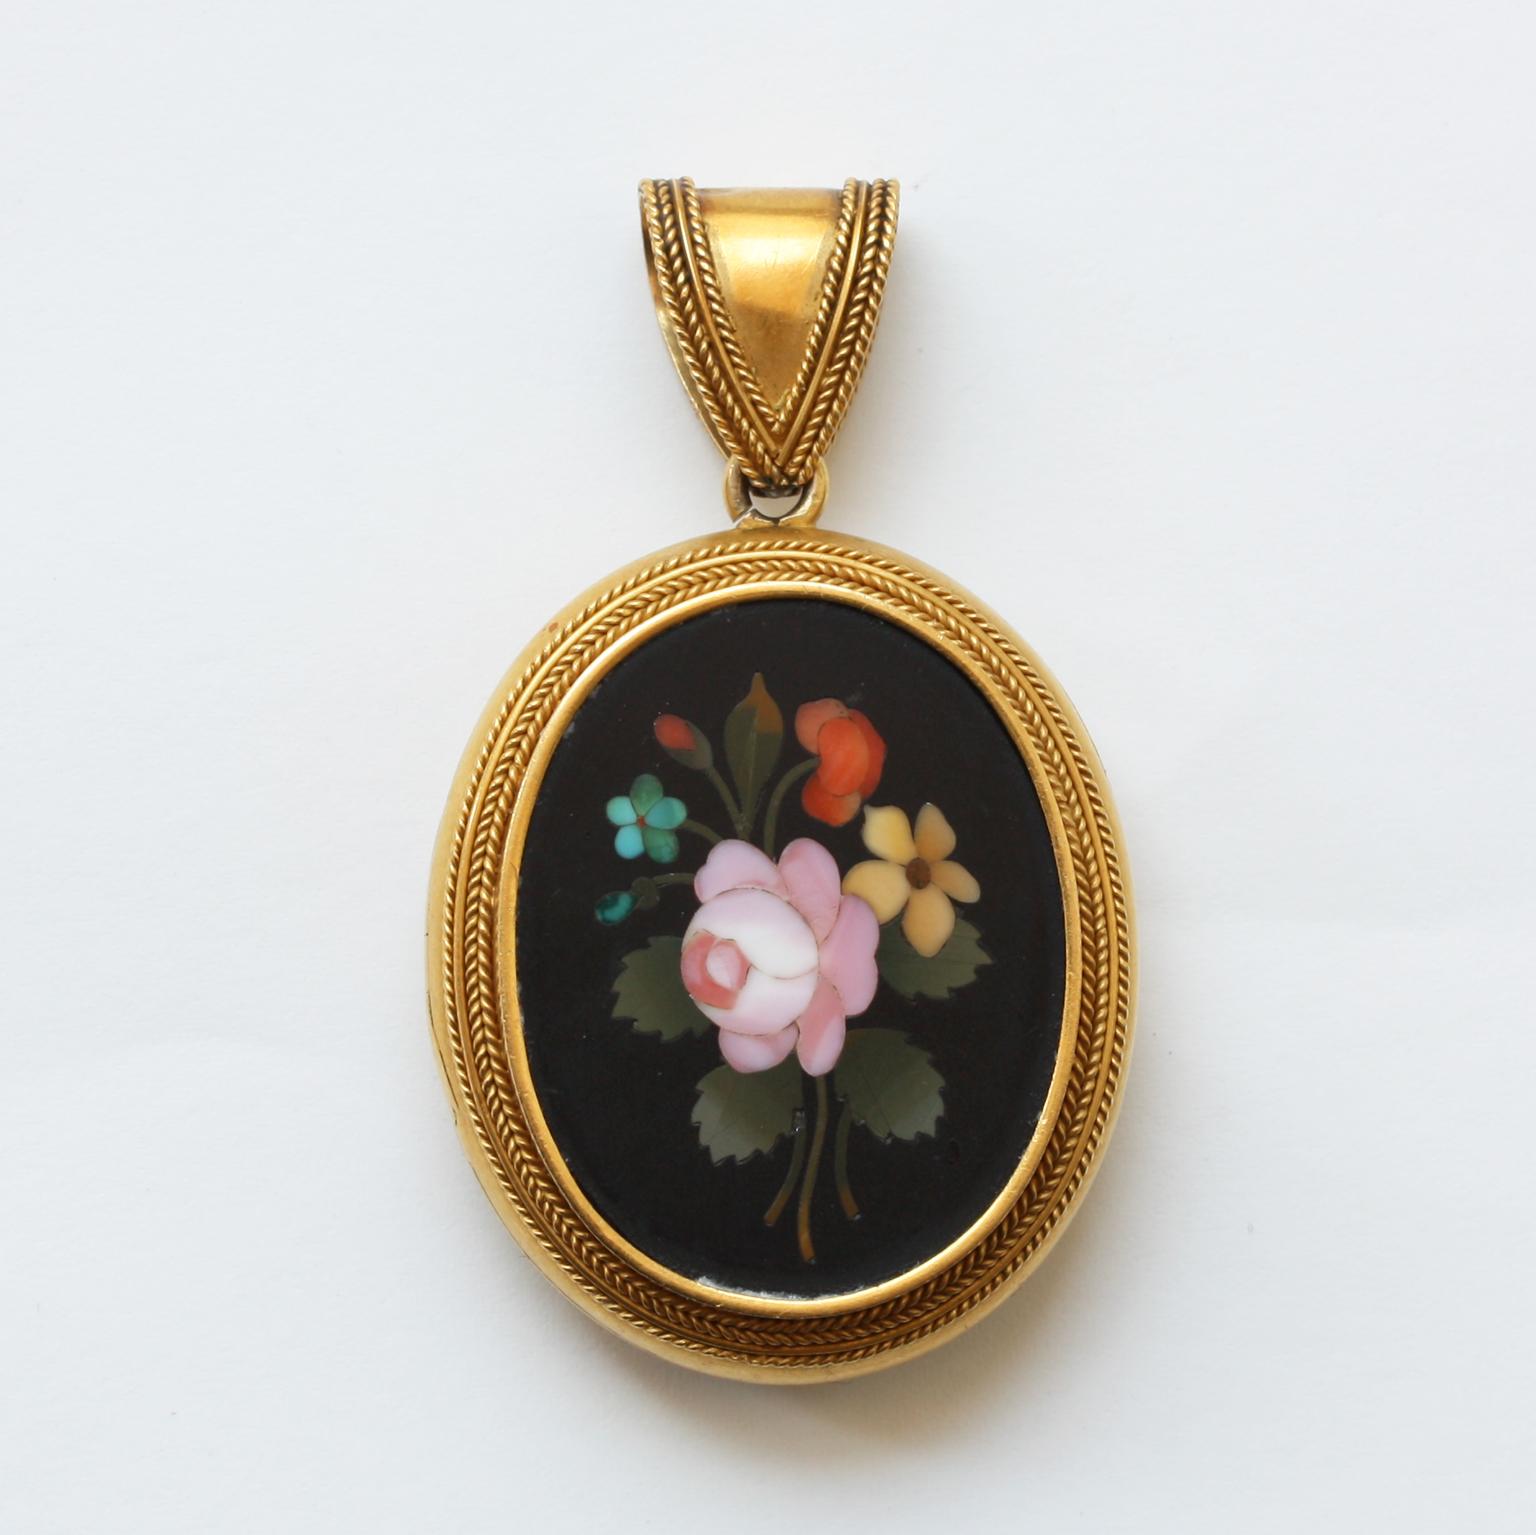 An 18 carat gold locket in neo etruscan style with a Florentine pietra dura with a different bouquet of flowers on each side, one glassed compartment, 19the century.

dimensions: 5 x 3 cm
weight: 24 grams